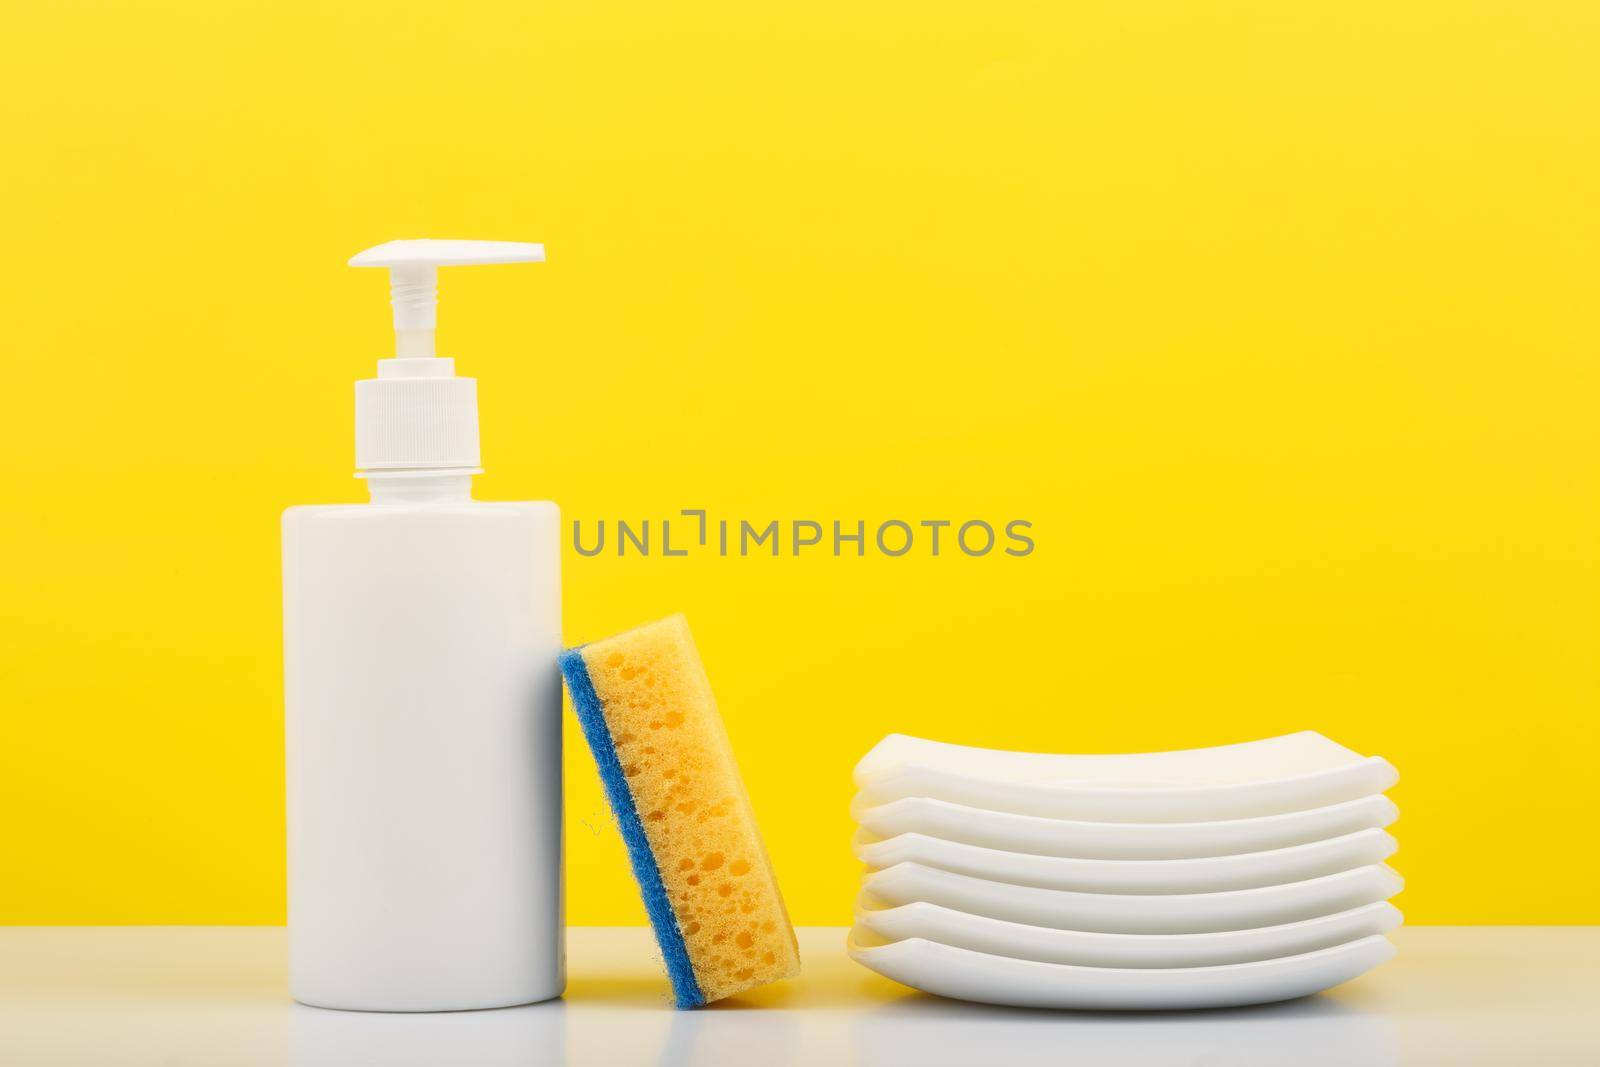 Colorful dishwashing concept, creative composition with liquid detergent in white plastic bottle with dispenser, yellow cleaning sponge and pile of clean plates against yellow background